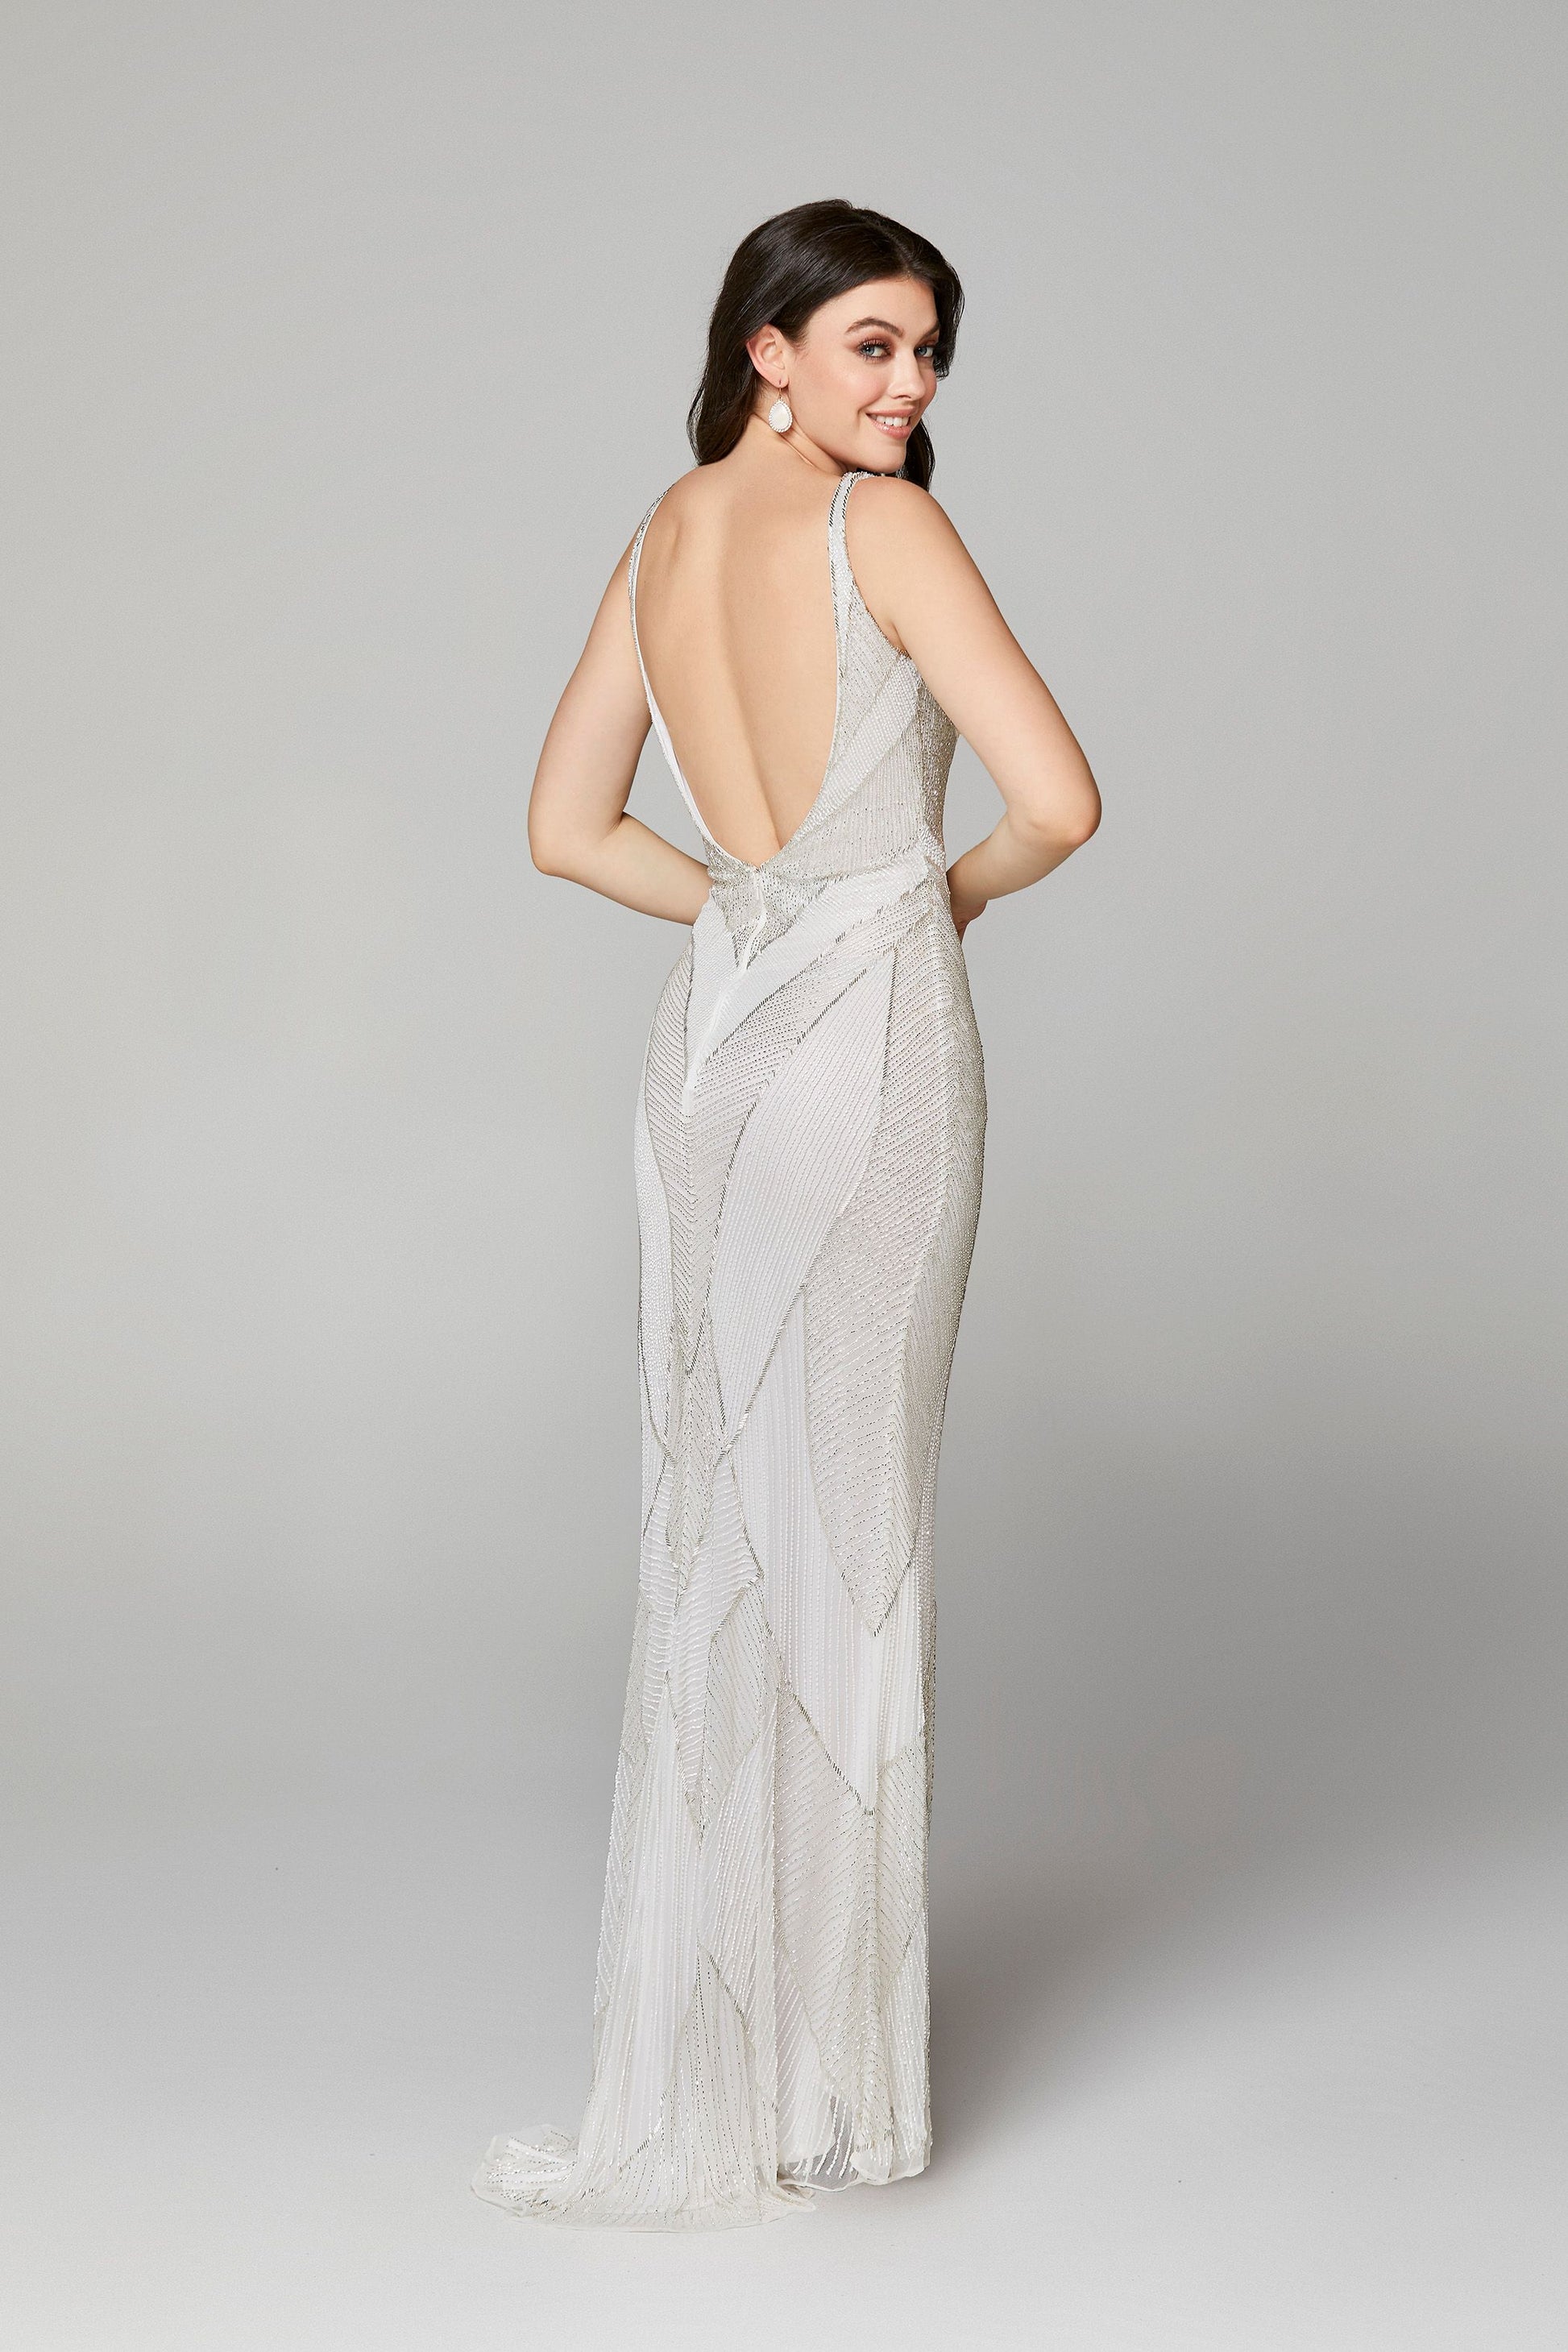 Primavera Couture 3629 is a long fitted formal evening gown. Featuring a V neckline and an open back. This backless prom dress has Flattering Geometric Beading to accentuate any figure! Sweeping train falling behind the skirt.  Available Sizes: 00,0,2,4,6,8,10,12,14,16,18  Available Colors: Black/Silver, Ivory, Midnight